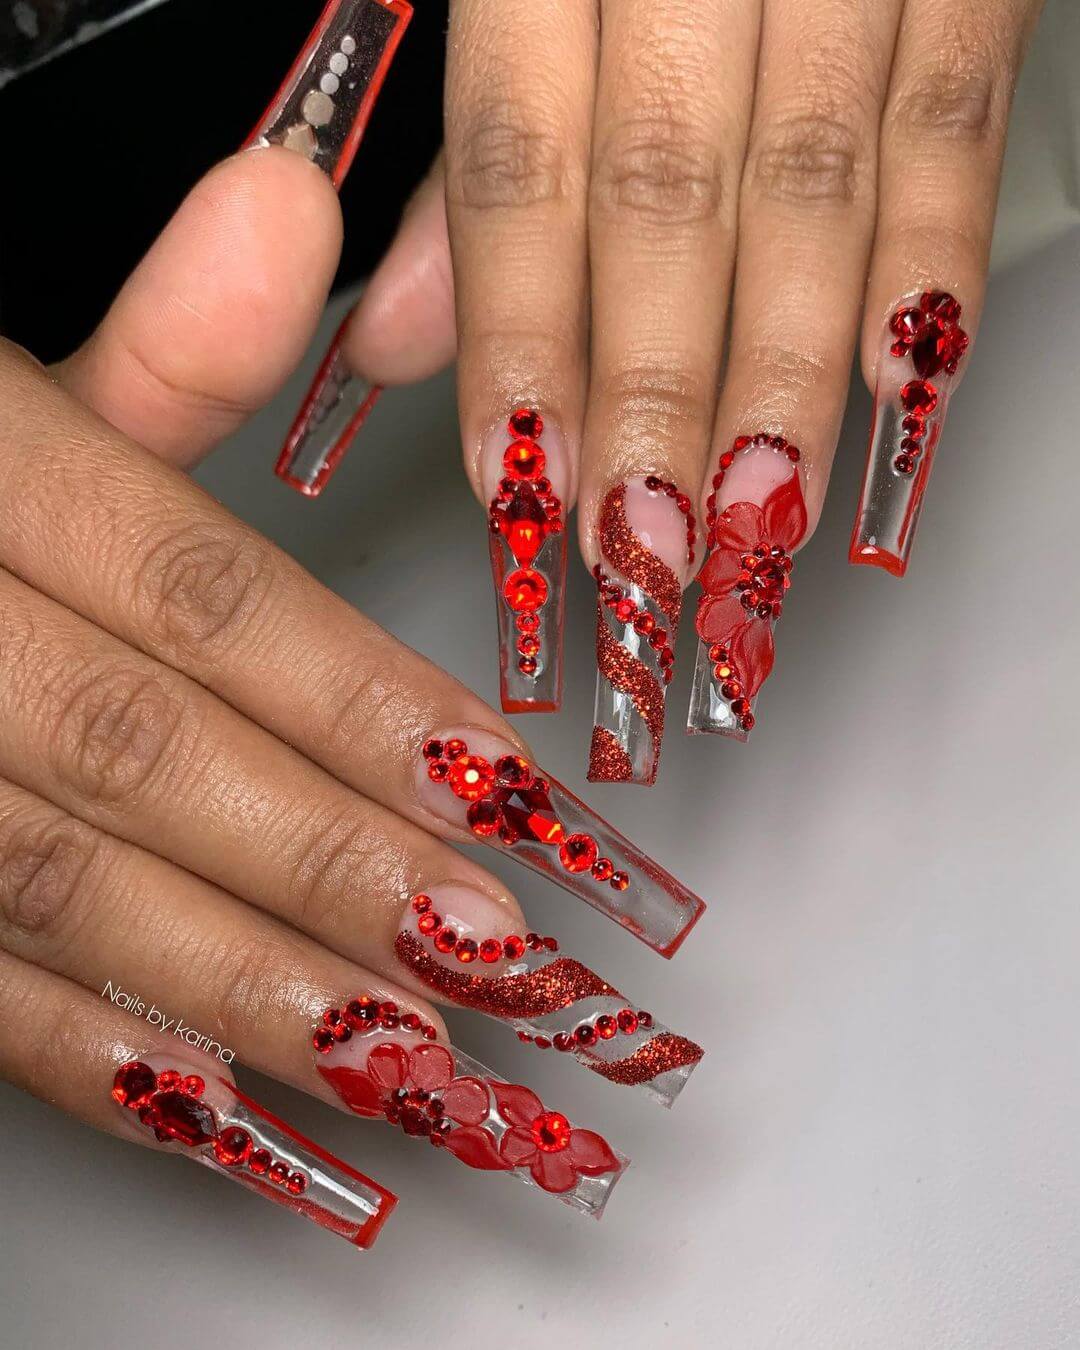 Crystal Nail Art Designs Try out the stunning red crystal nail art